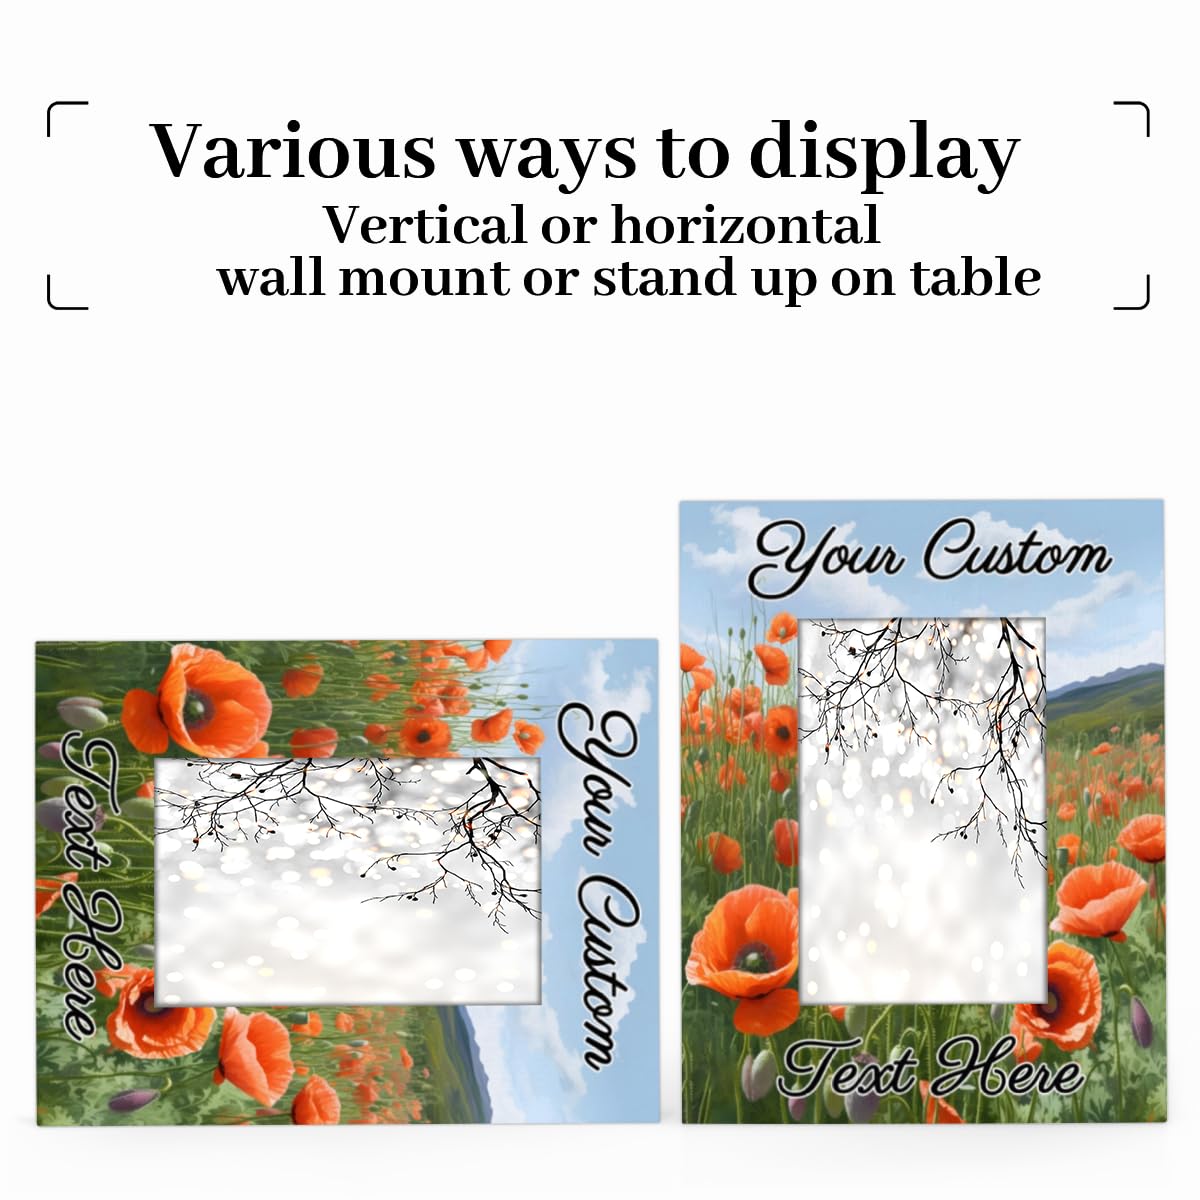 Mardesigns Poppy Field Personalized 5x7 Picture Frame,Red Flower Customized Wooden Photo Picture Frame Fits 5x7 & 4x6 Picture for Wall and Table Vertical or Horizontal Display Photo Frame